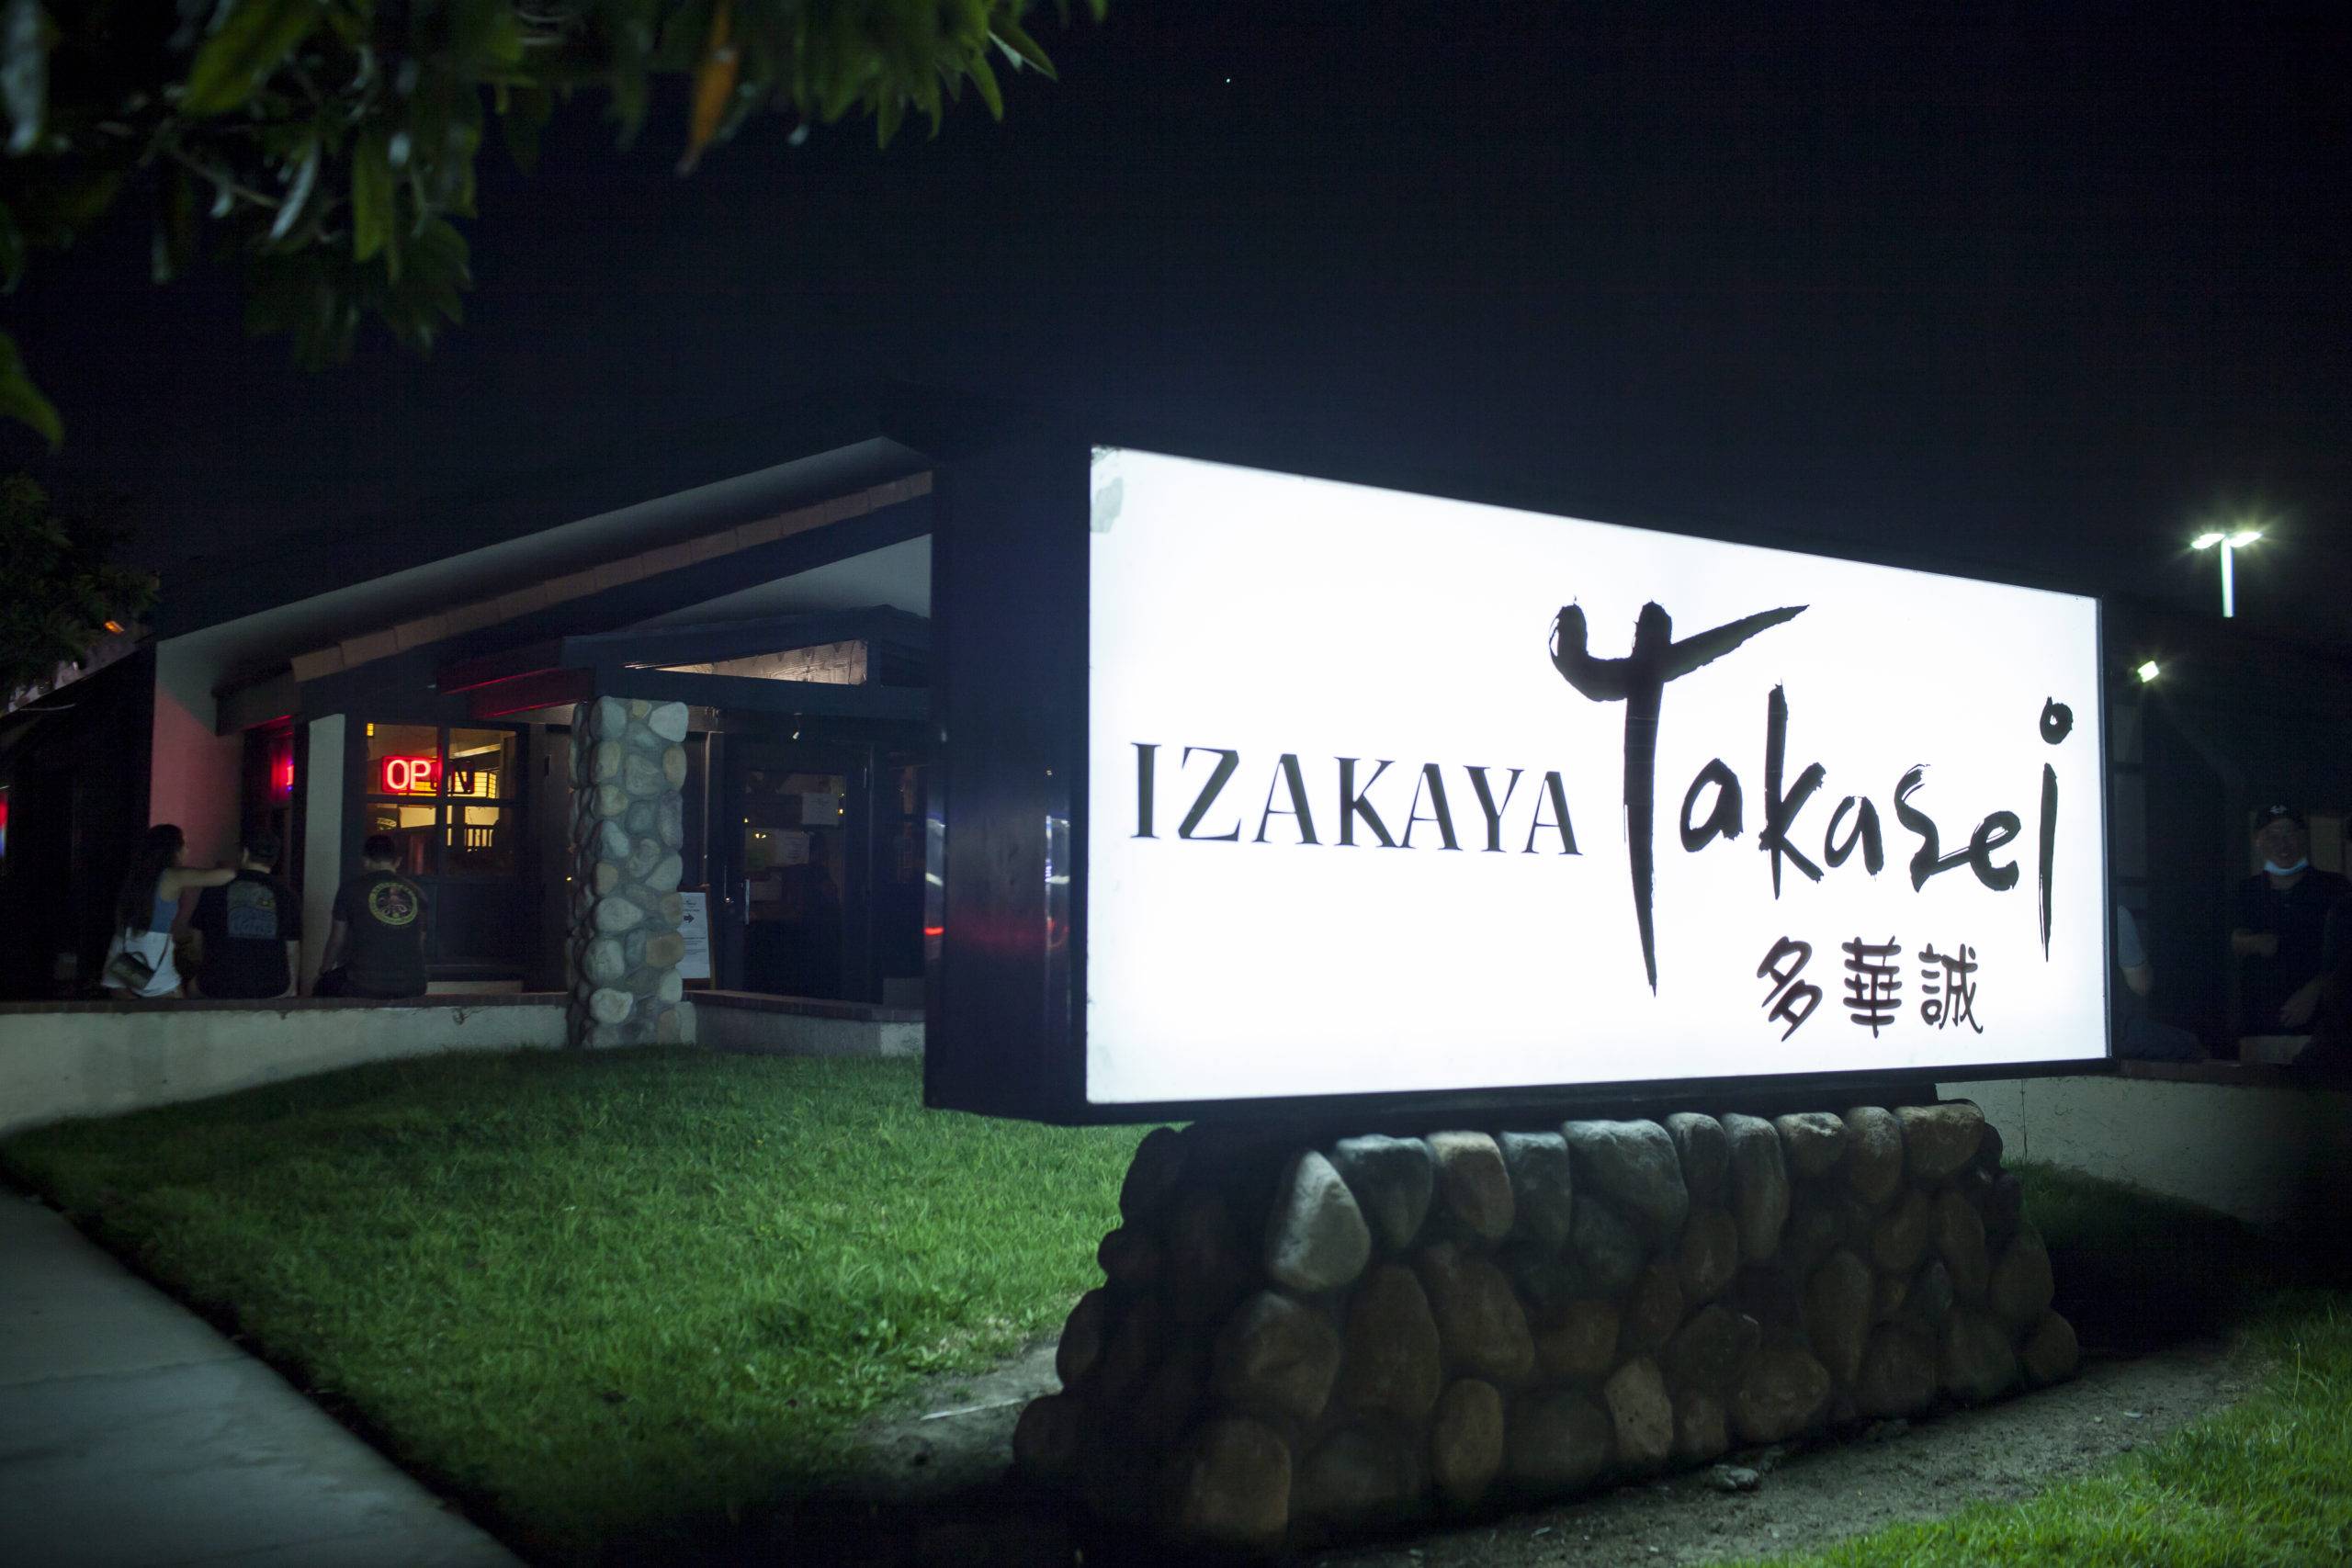 Izakaya Takasei, featuring authentic Japanese food in a cozy atmosphere